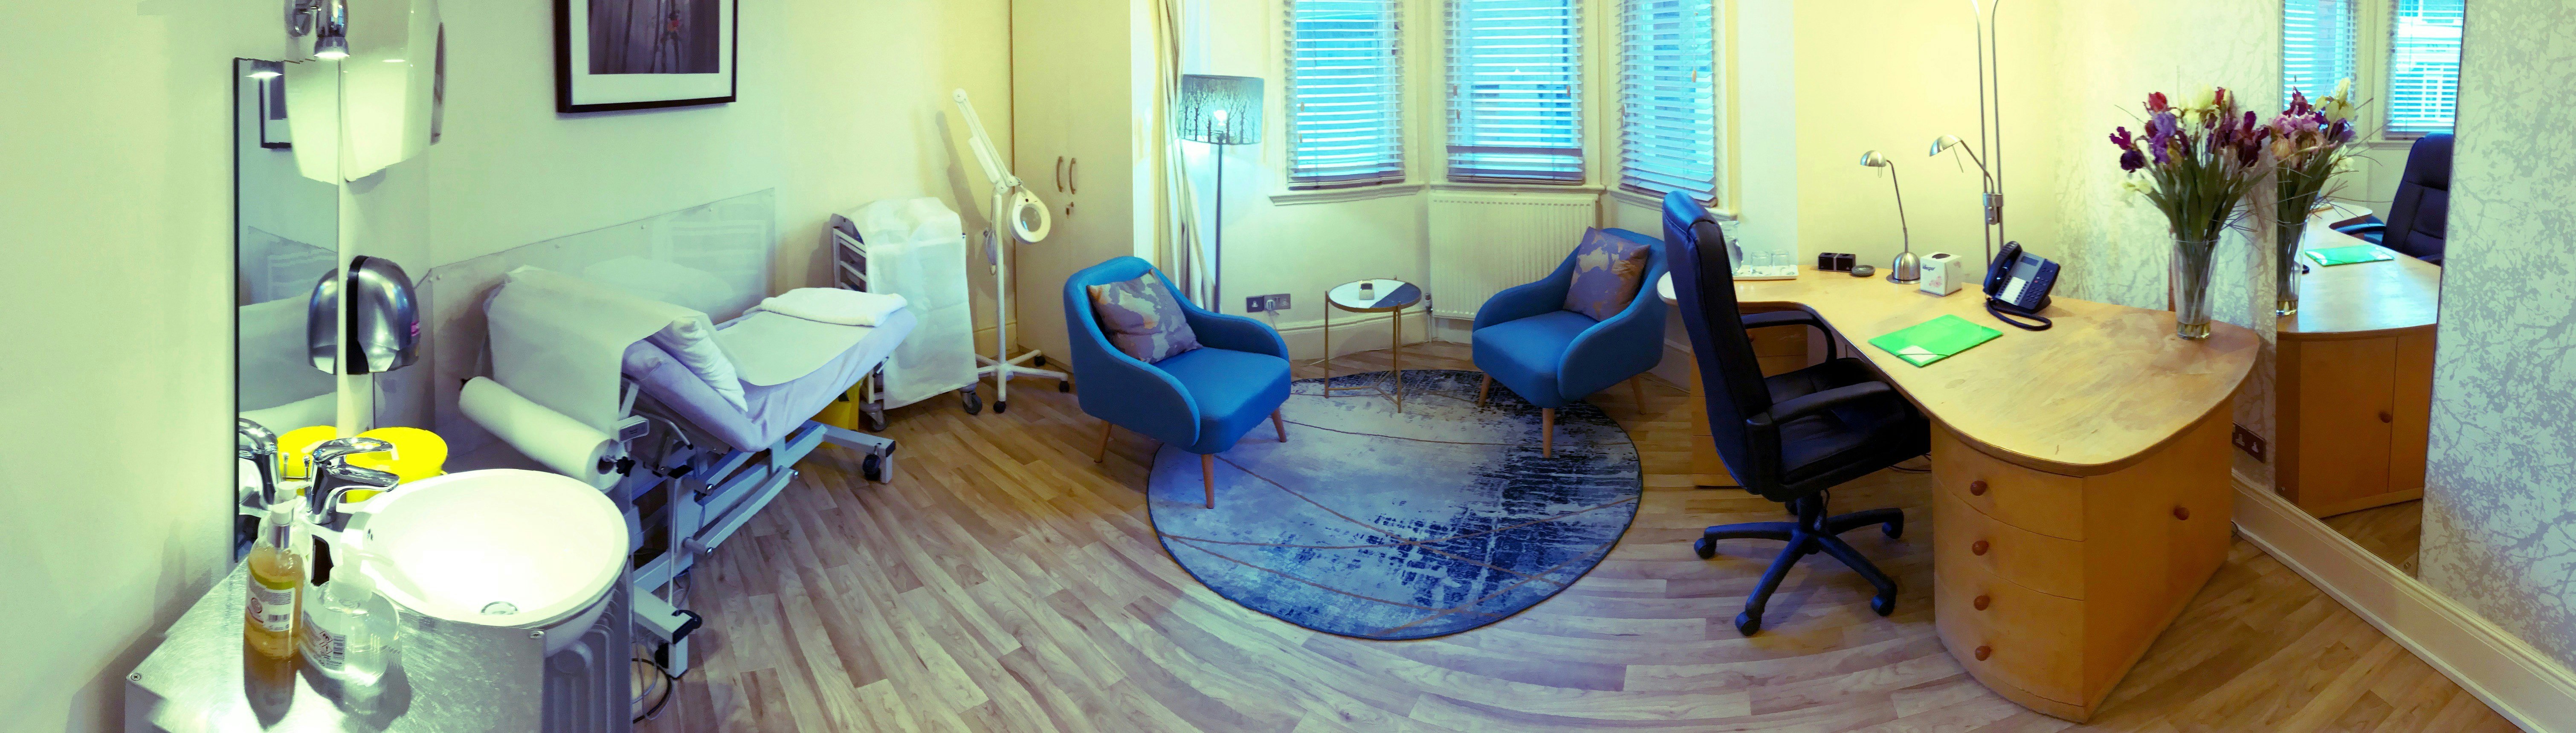 Therapy Rooms Venues in London - Wilbraham Place Practice